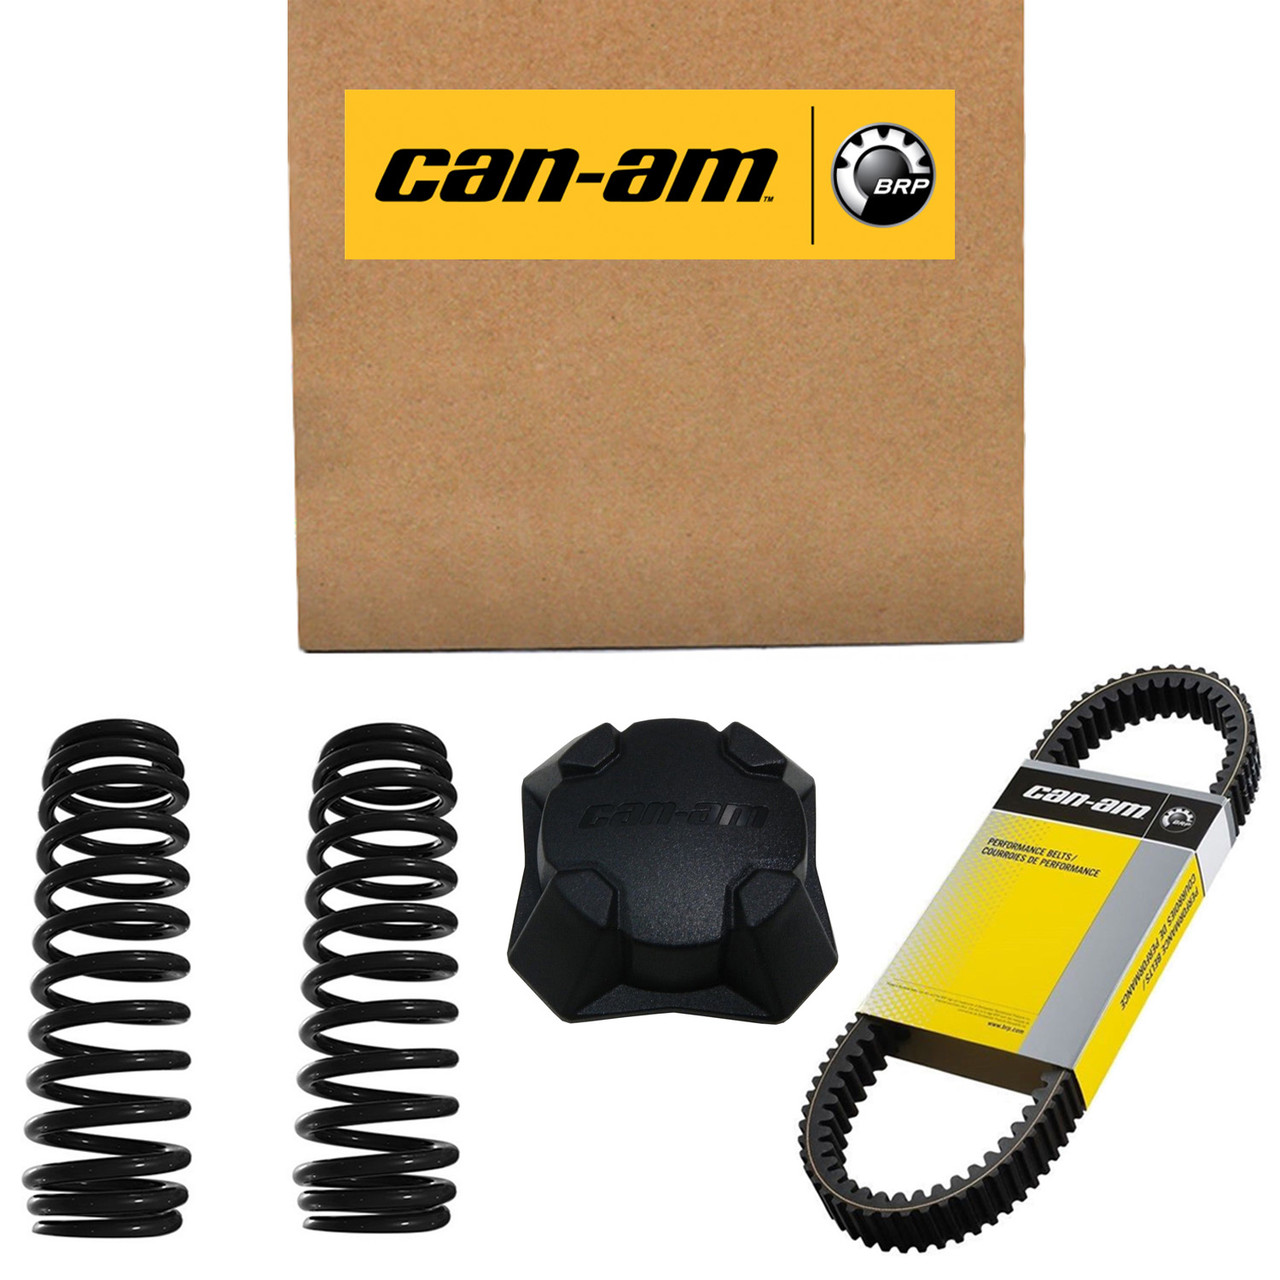 Can-Am New OEM Hood Decal Hd8, 704907866